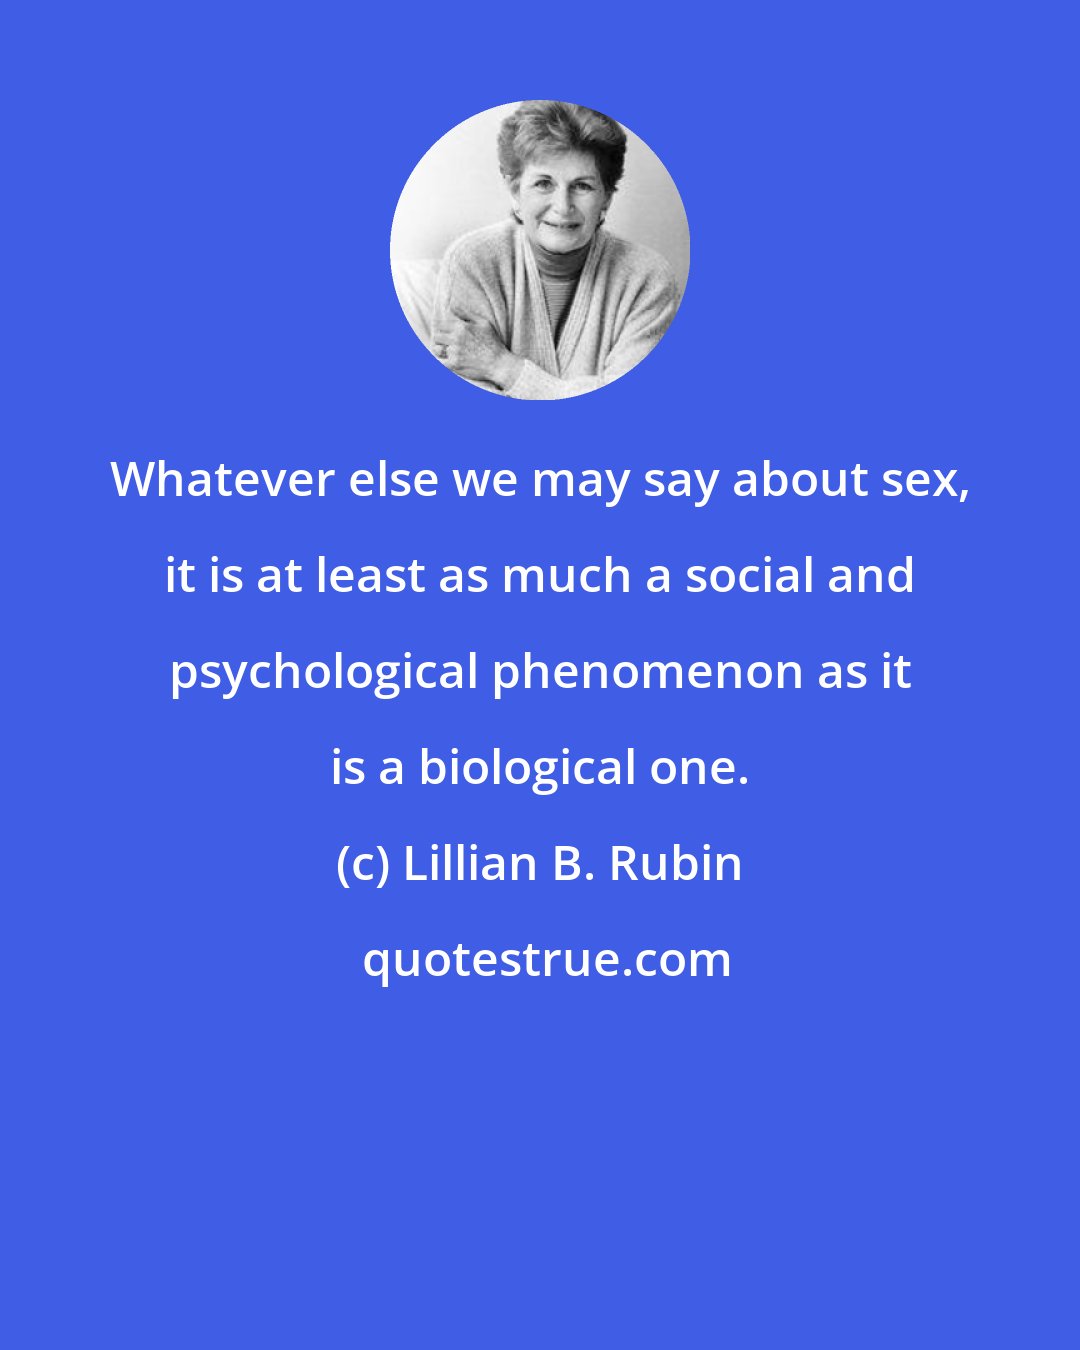 Lillian B. Rubin: Whatever else we may say about sex, it is at least as much a social and psychological phenomenon as it is a biological one.